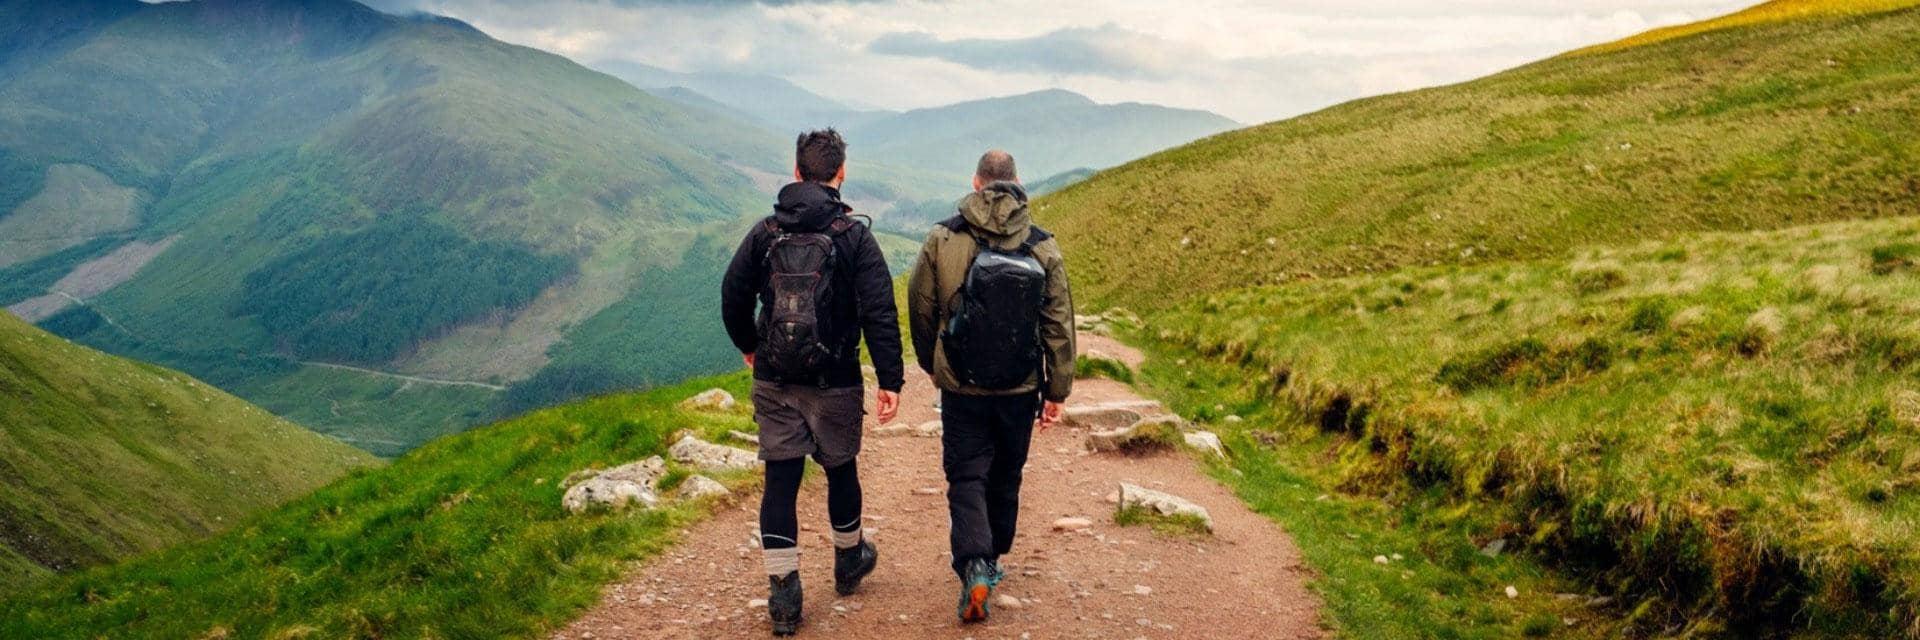 Two men hiking on hilly terrain. Resilience to COVID-19 means businesses are ready for the future.
